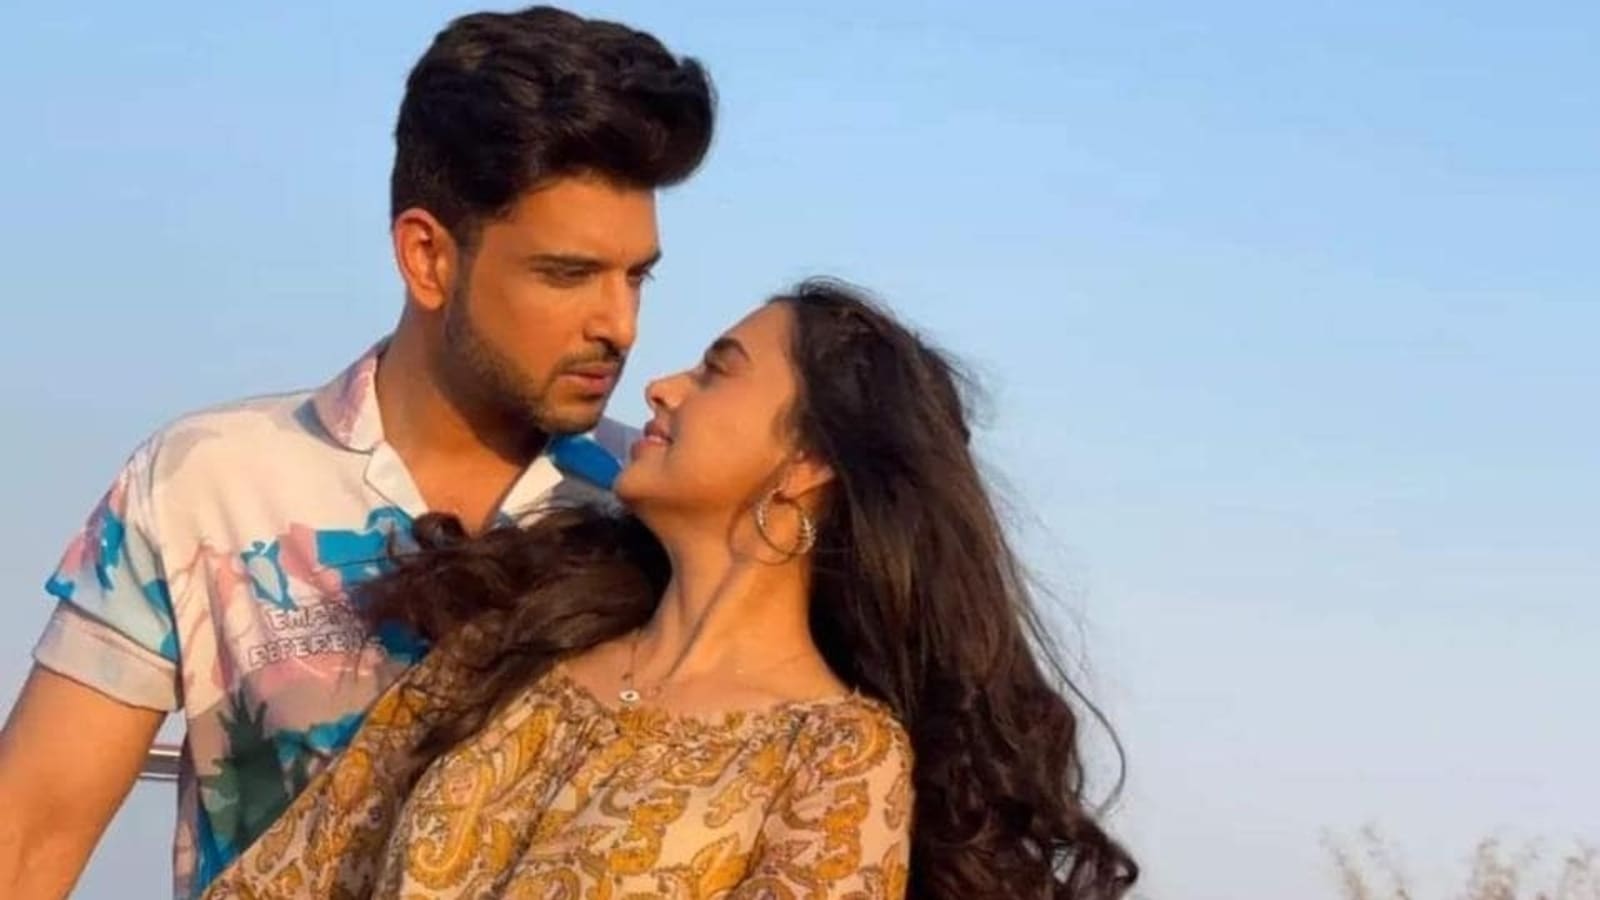 Karan Kundrra reacts angrily to Tejasswi Prakash’s fans who morphed abusive messages from him: ‘You must be proud T’